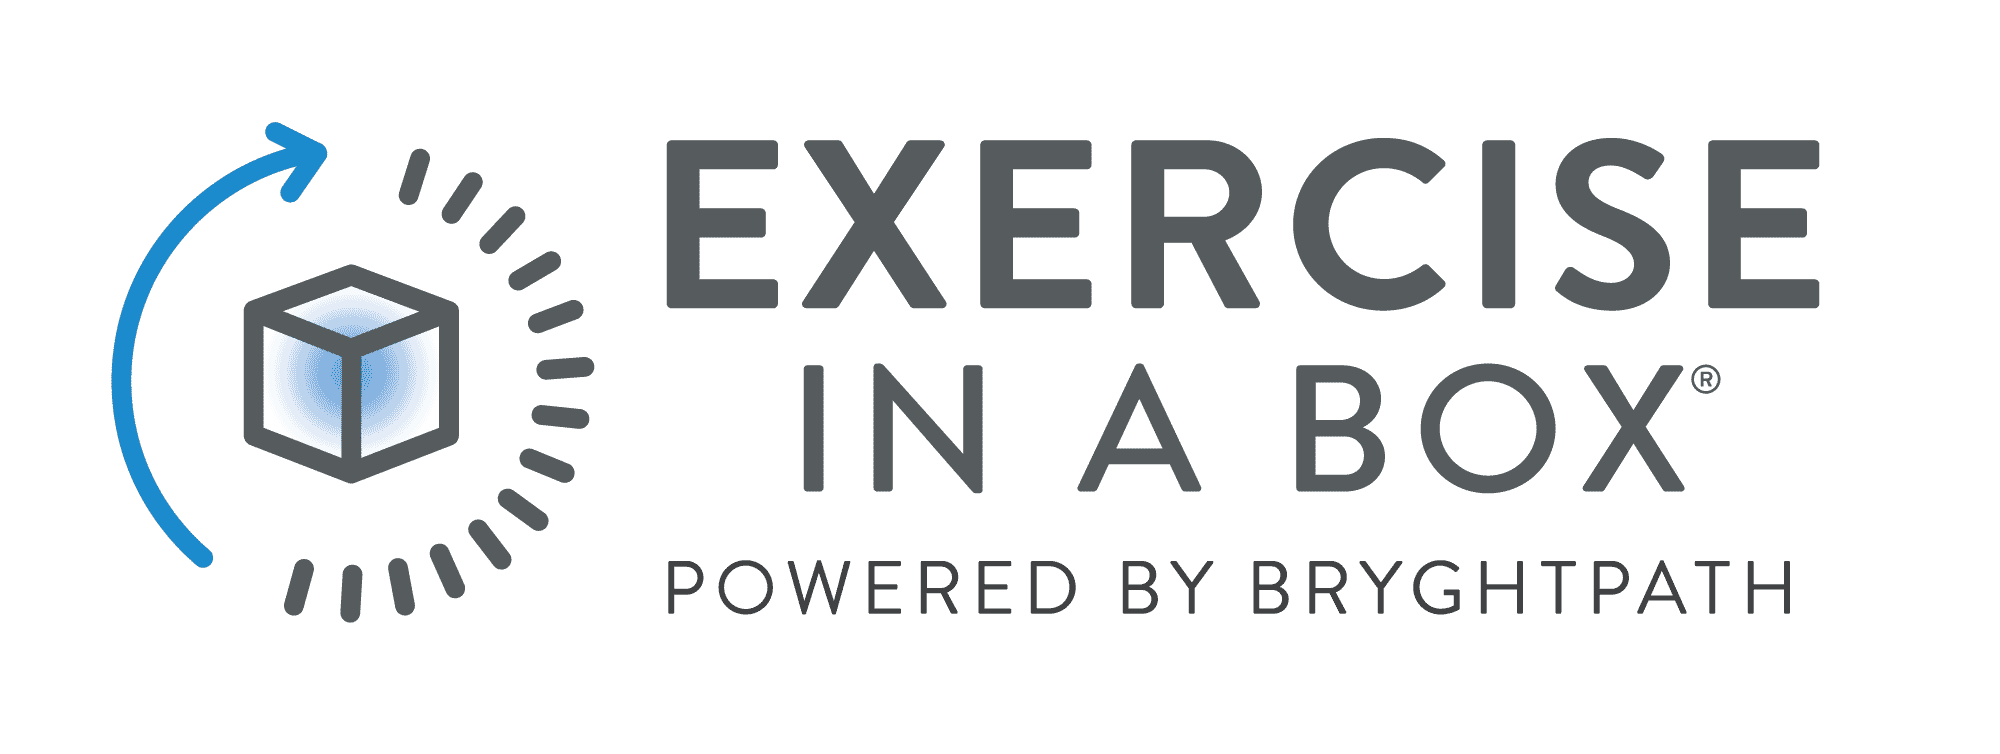 Exercise-in-a-Box-Logo-Horizontal-1 Press Release:  Bryghtpath LLC introduces Exercise in a Box™️ for efficient crisis & continuity exercises